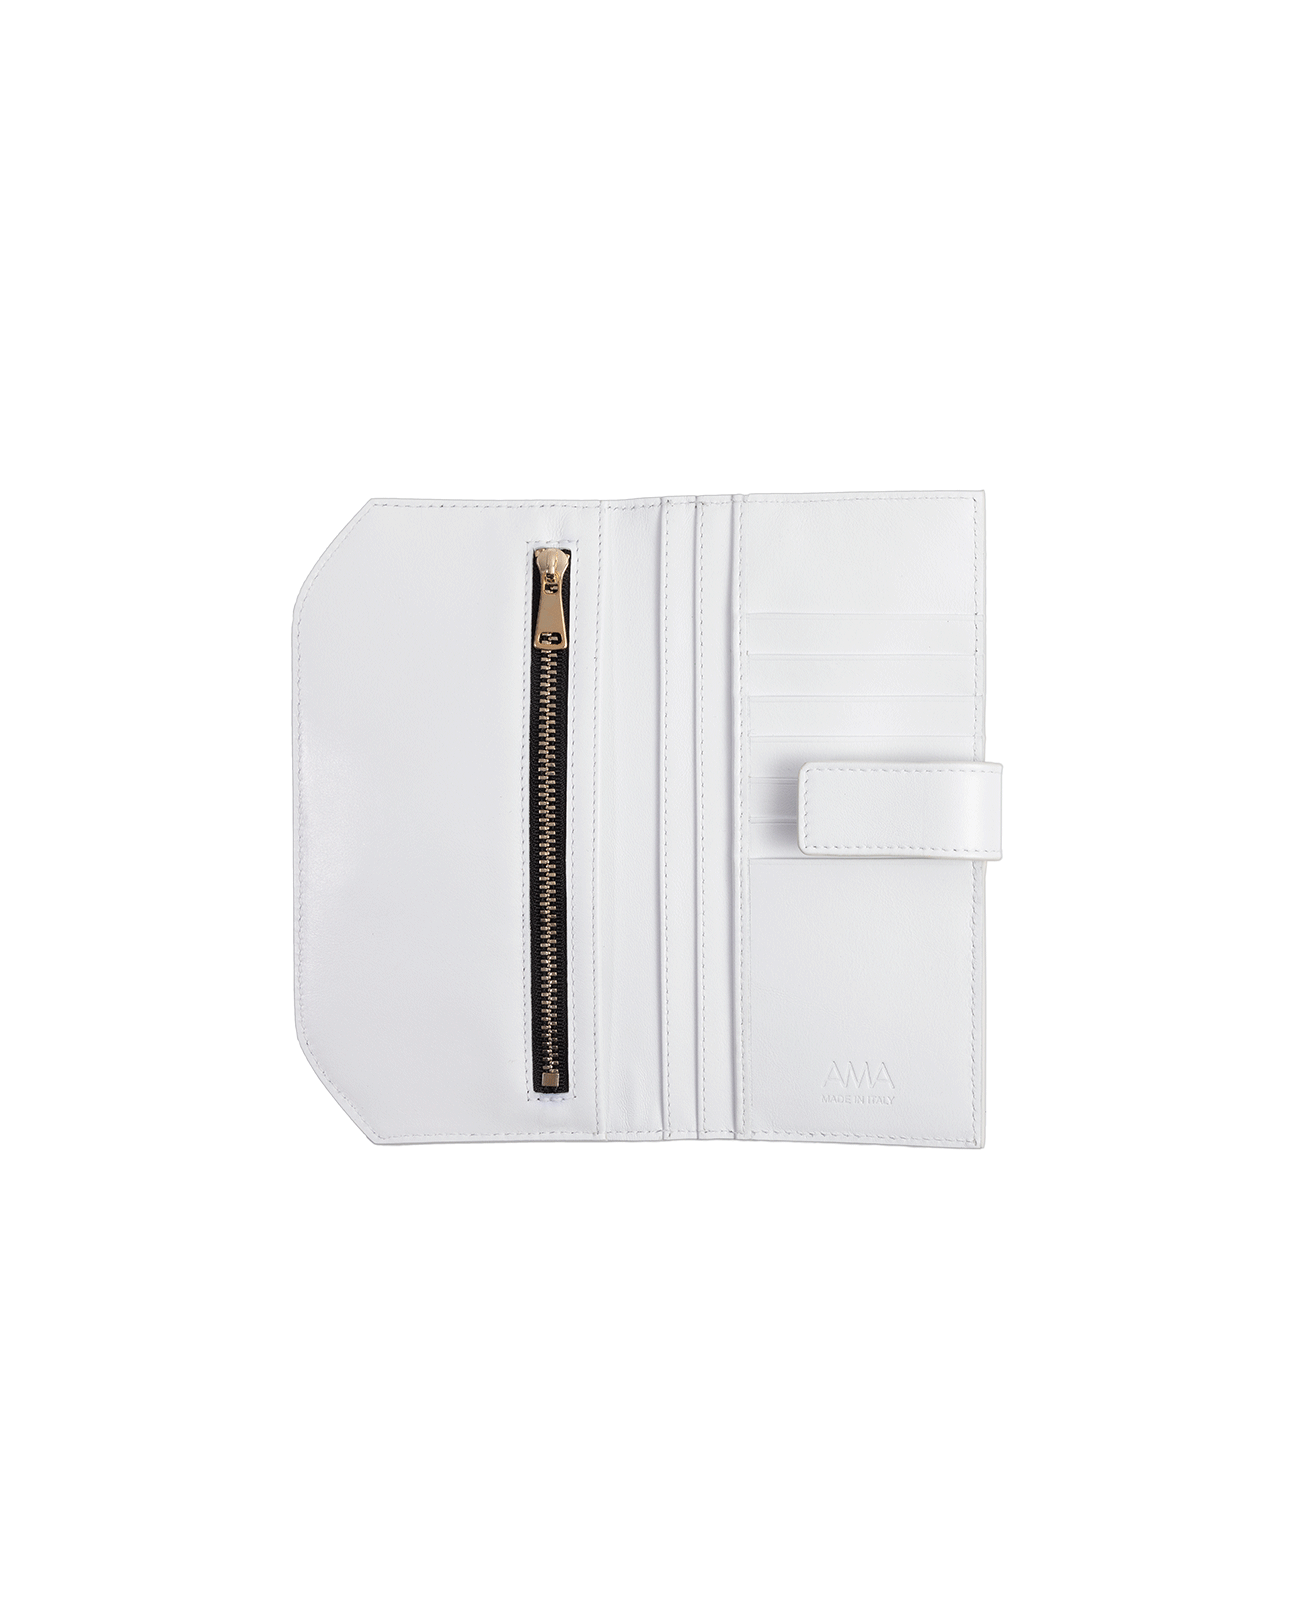 Wallet in Italian full-grain leather. Designed to carry your personal items. Available in a variety of styles and designs. Color: Ivory. Size: Medium